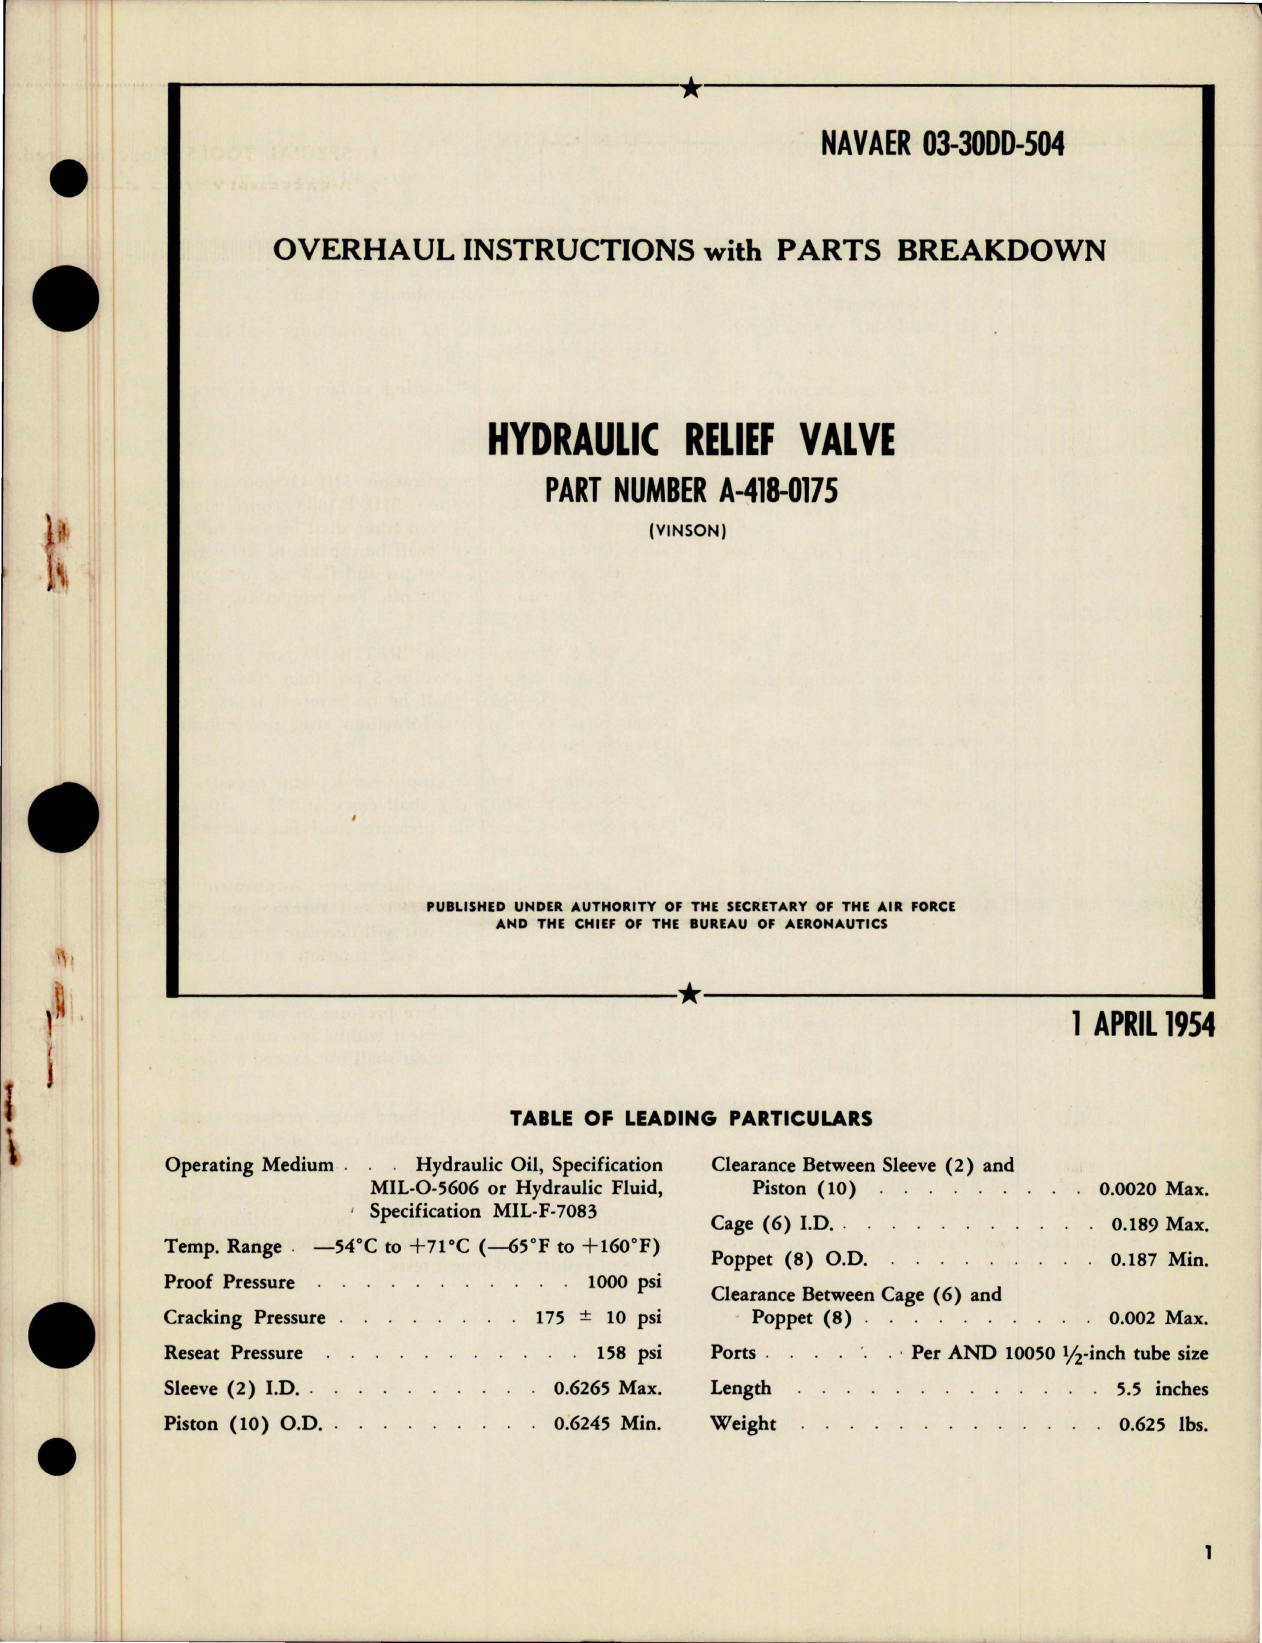 Sample page 1 from AirCorps Library document: Overhaul Instructions with Parts Breakdown for Hydraulic Relief Valve - Part A-418-0175